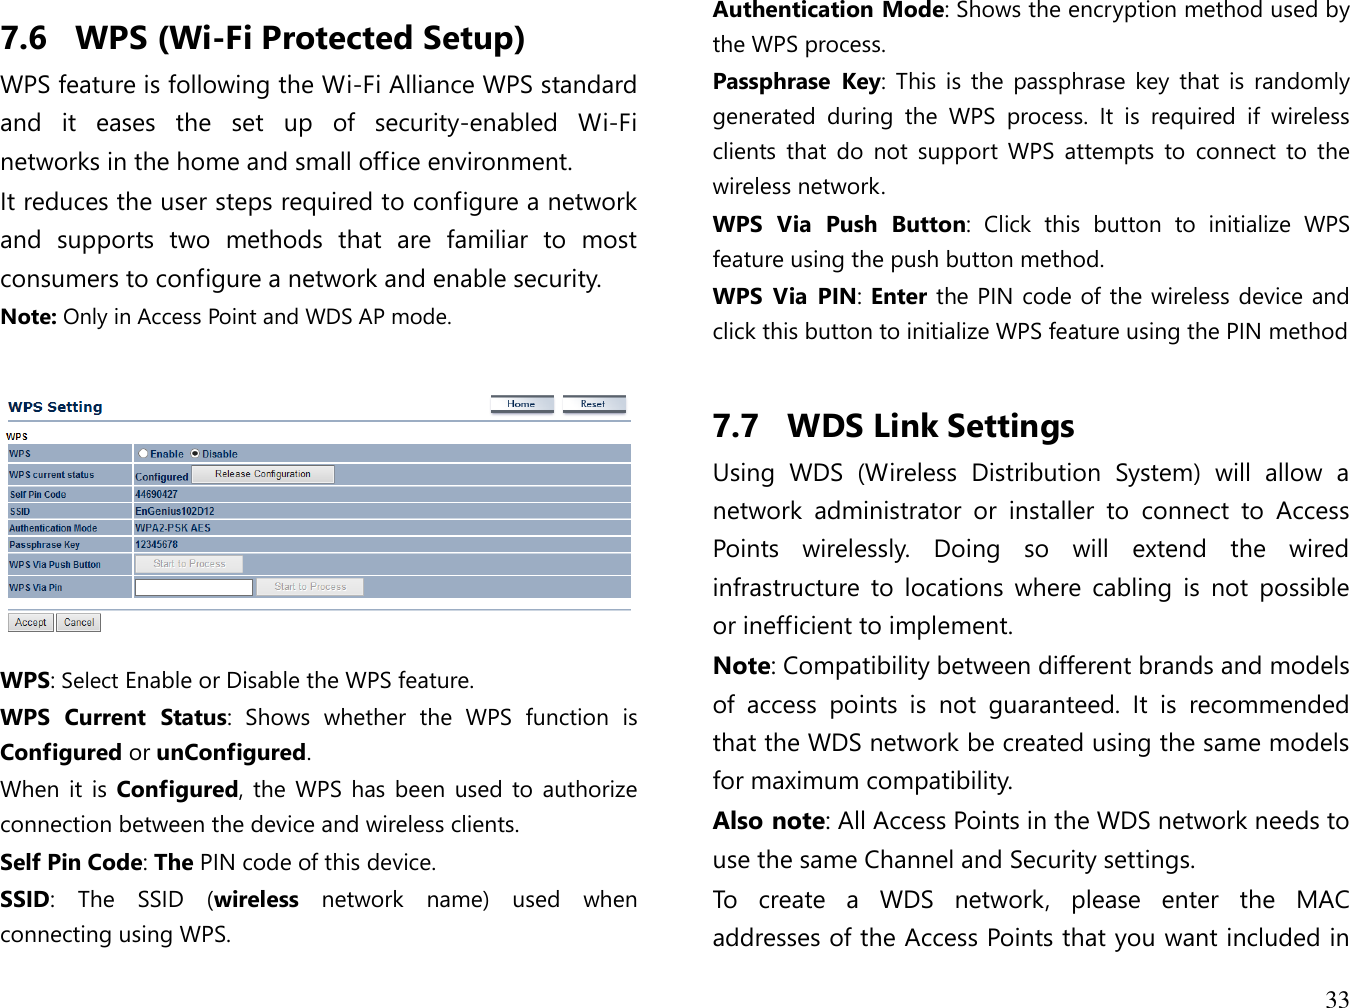  33  7.6 WPS (Wi-Fi Protected Setup) WPS feature is following the Wi-Fi Alliance WPS standard and  it  eases  the  set  up  of  security-enabled  Wi-Fi networks in the home and small office environment.  It reduces the user steps required to configure a network and  supports  two  methods  that  are  familiar  to  most consumers to configure a network and enable security. Note: Only in Access Point and WDS AP mode.     WPS: Select Enable or Disable the WPS feature. WPS  Current  Status:  Shows  whether  the  WPS  function  is Configured or unConfigured. When it is  Configured, the WPS has been used to authorize connection between the device and wireless clients. Self Pin Code: The PIN code of this device. SSID:  The  SSID  (wireless  network  name)  used  when connecting using WPS. Authentication Mode: Shows the encryption method used by the WPS process. Passphrase  Key:  This  is the  passphrase  key  that  is  randomly generated  during  the  WPS  process.  It  is  required  if  wireless clients  that  do  not  support  WPS  attempts  to  connect  to  the wireless network. WPS  Via  Push  Button:  Click  this  button  to  initialize  WPS feature using the push button method. WPS  Via  PIN: Enter the PIN code of the wireless device and click this button to initialize WPS feature using the PIN method  7.7 WDS Link Settings Using  WDS  (Wireless  Distribution  System)  will  allow  a network  administrator  or  installer  to  connect  to  Access Points  wirelessly.  Doing  so  will  extend  the  wired infrastructure  to  locations  where  cabling  is  not  possible or inefficient to implement. Note: Compatibility between different brands and models of  access  points  is  not  guaranteed.  It  is  recommended that the WDS network be created using the same models for maximum compatibility. Also note: All Access Points in the WDS network needs to use the same Channel and Security settings. To  create  a  WDS  network,  please  enter  the  MAC addresses of the Access Points that you want included in 